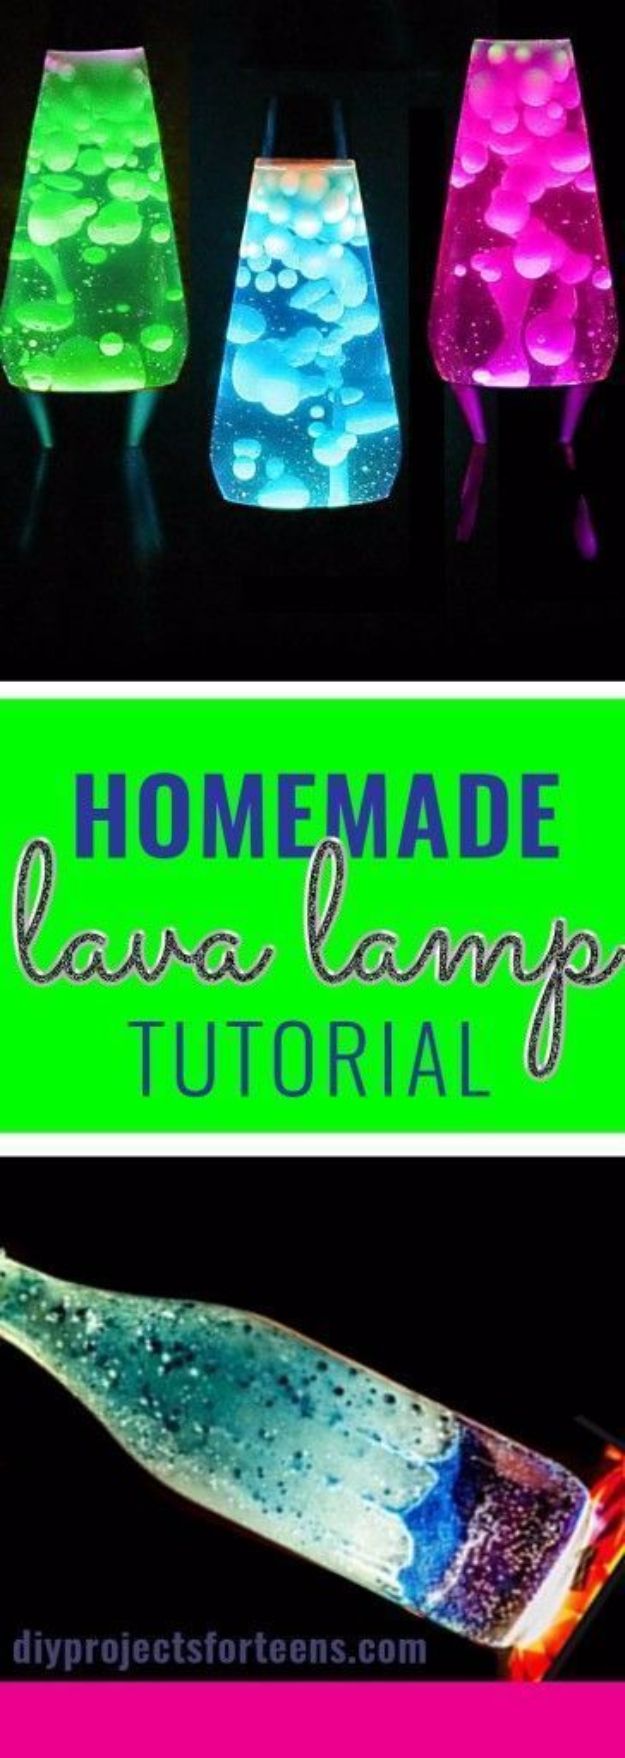 DIY Lighting Ideas for Teen and Kids Rooms - DIY Lava Lamp - Fun DIY Lights like Lamps, Pendants, Chandeliers and Hanging Fixtures for the Bedroom plus cool ideas With String Lights. Perfect for Girls and Boys Rooms, Teenagers and Dorm Room Decor 